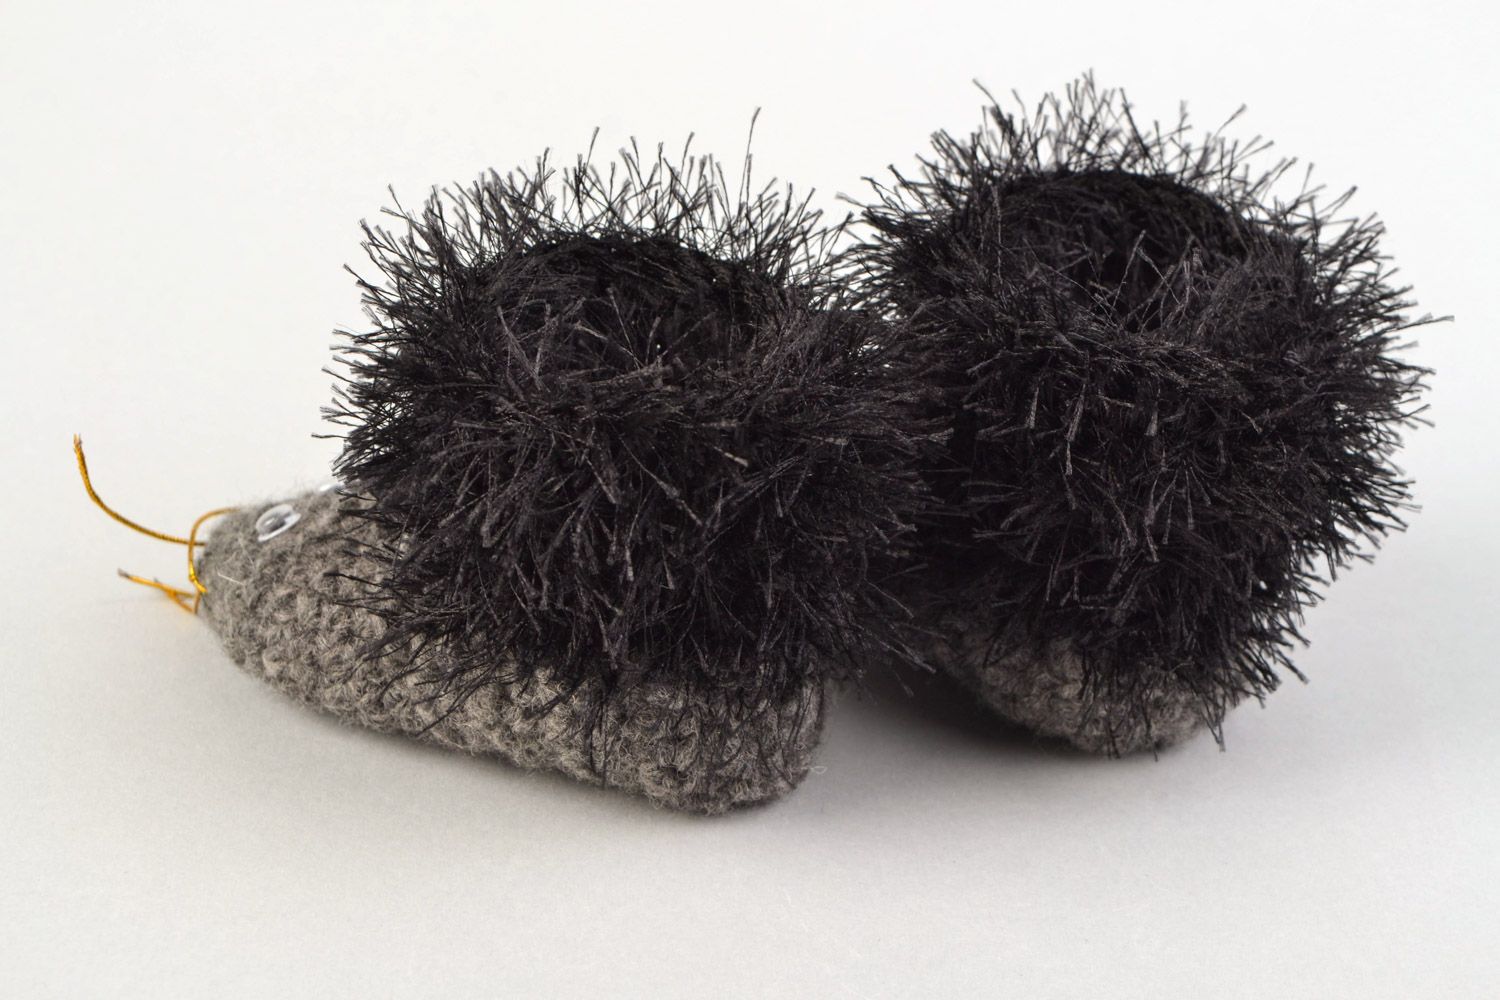 Handmade crochet baby shoes in the shape of gray hedgehogs with black edges photo 5